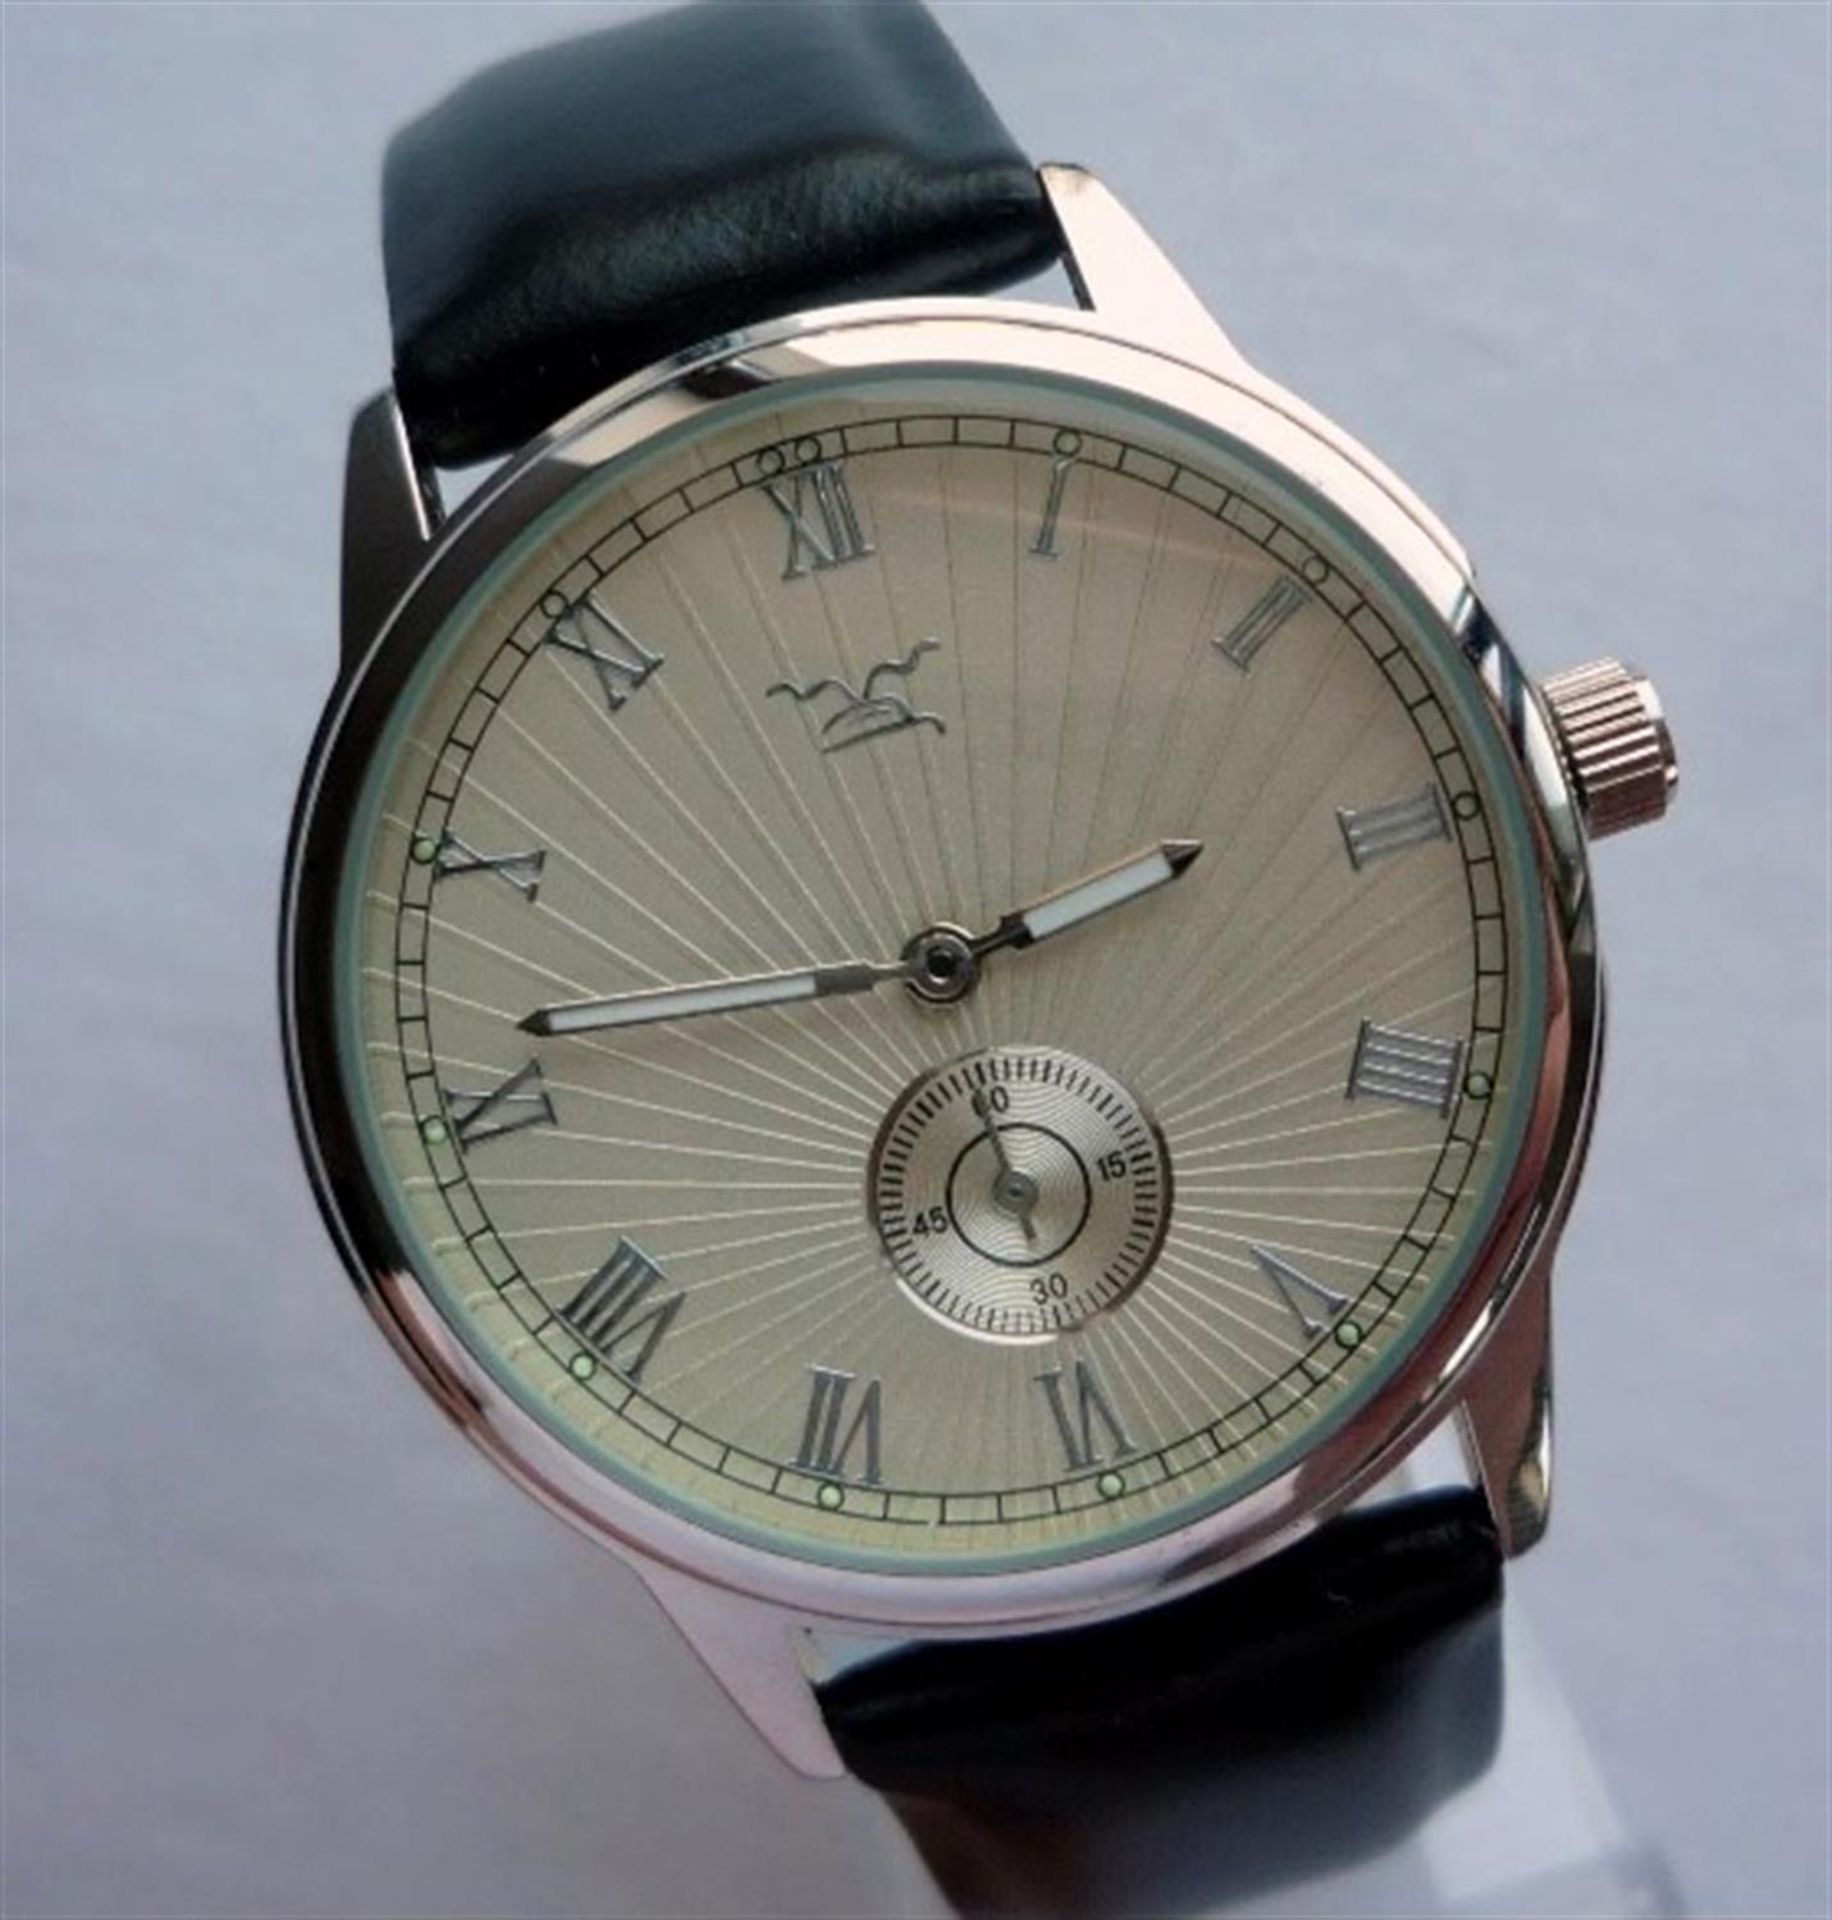 A Mercedes-Benz Classic Art Deco Style Gullwing Watch - Image 2 of 10